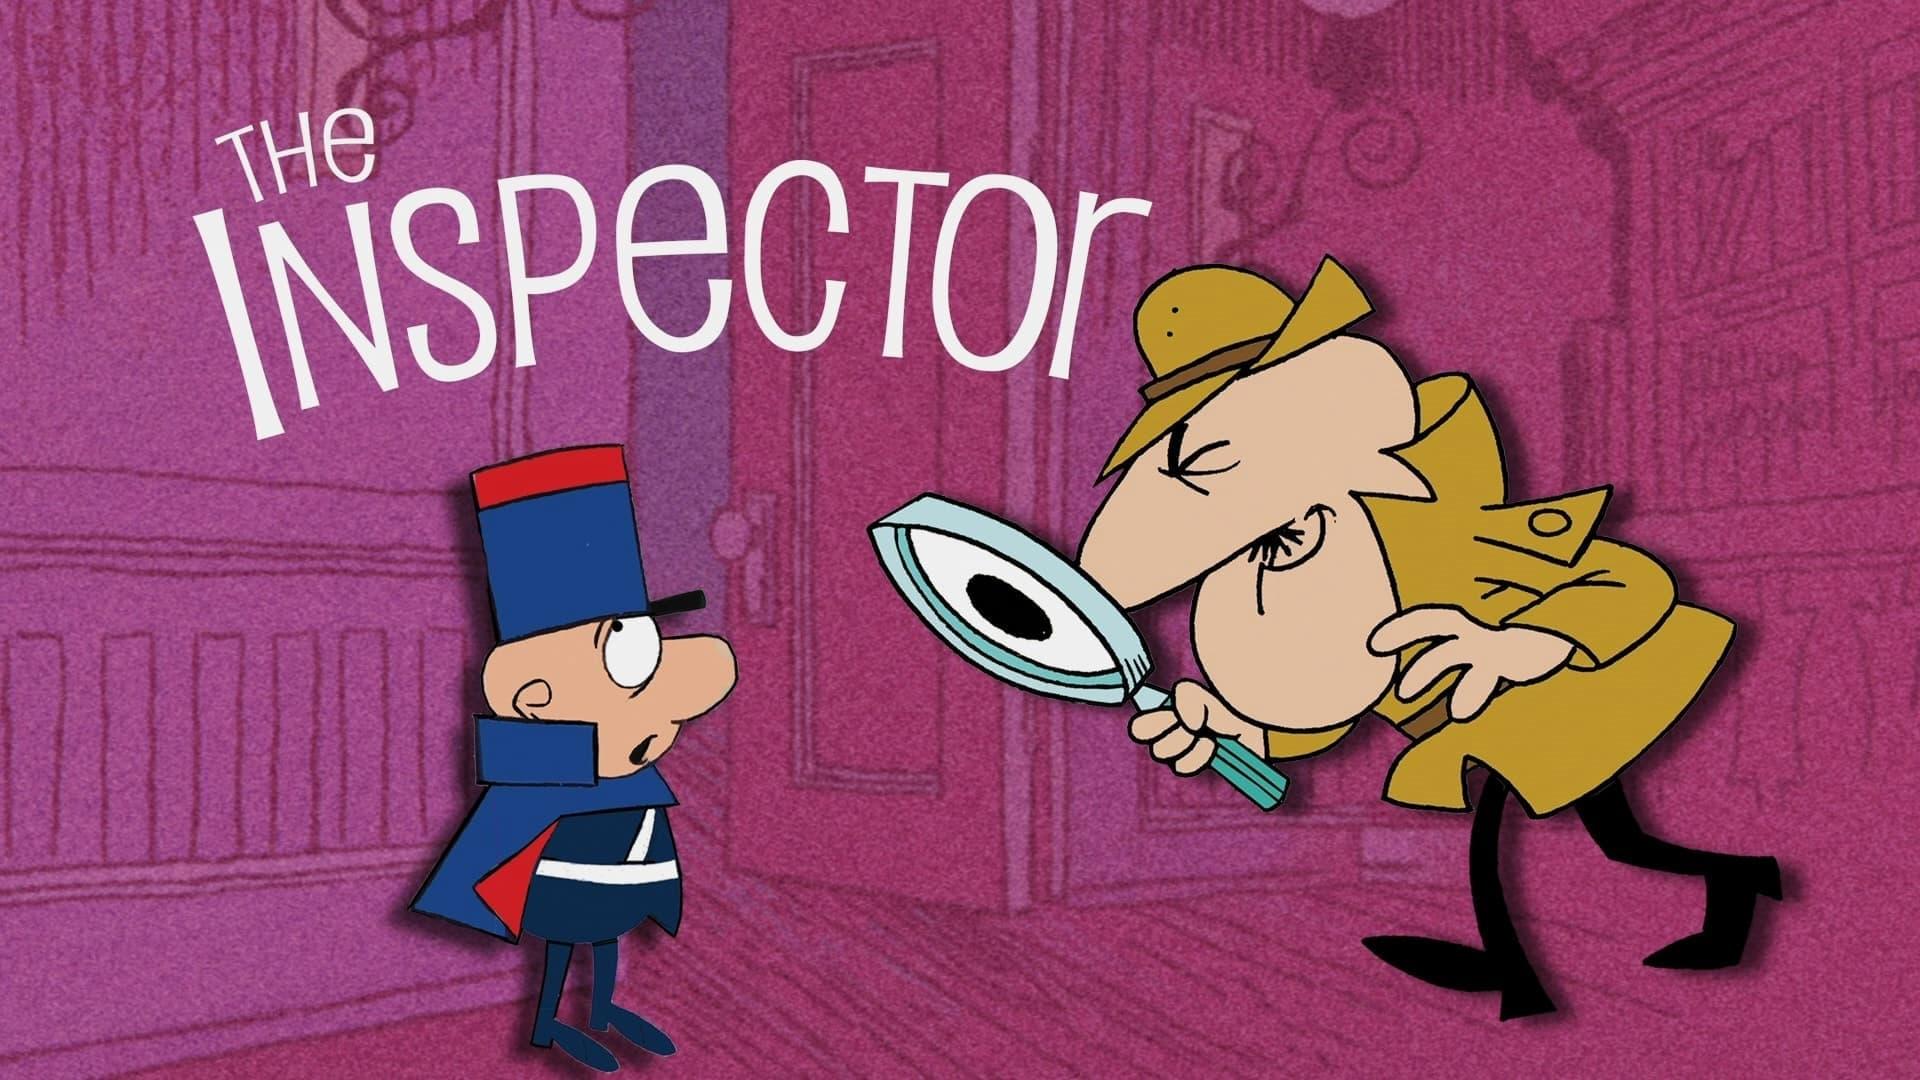 The Inspector backdrop